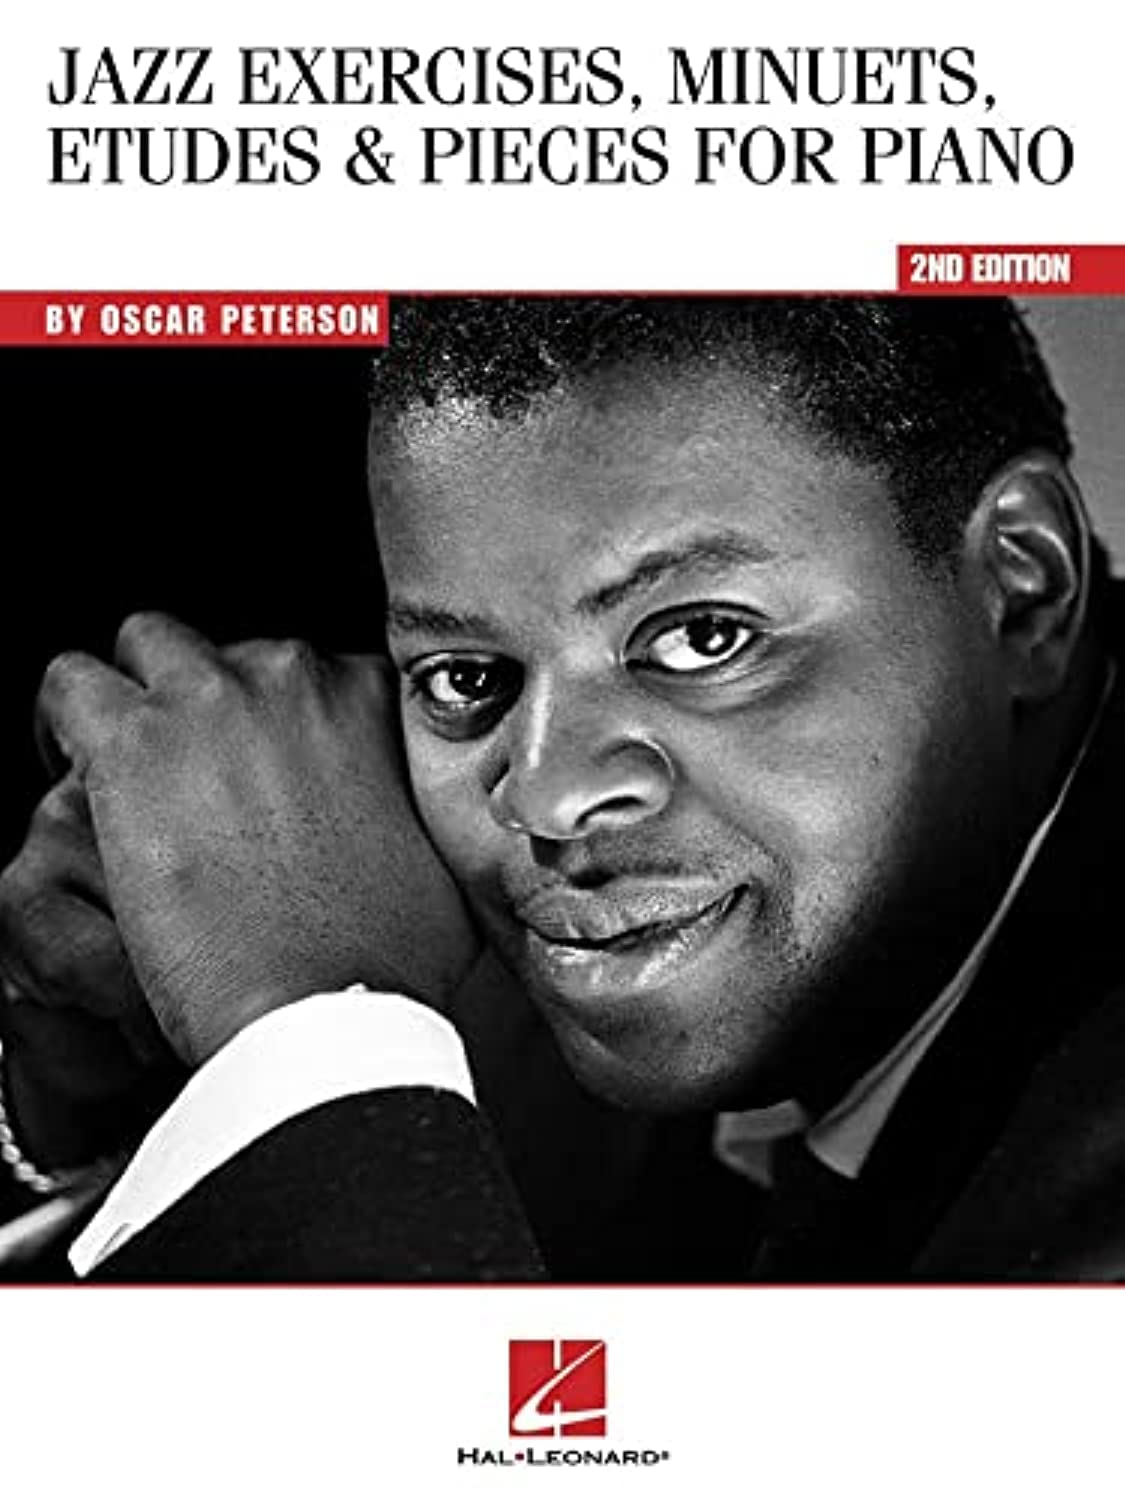 Book Cover Oscar Peterson - Jazz Exercises, Minuets, Etudes & Pieces for Piano